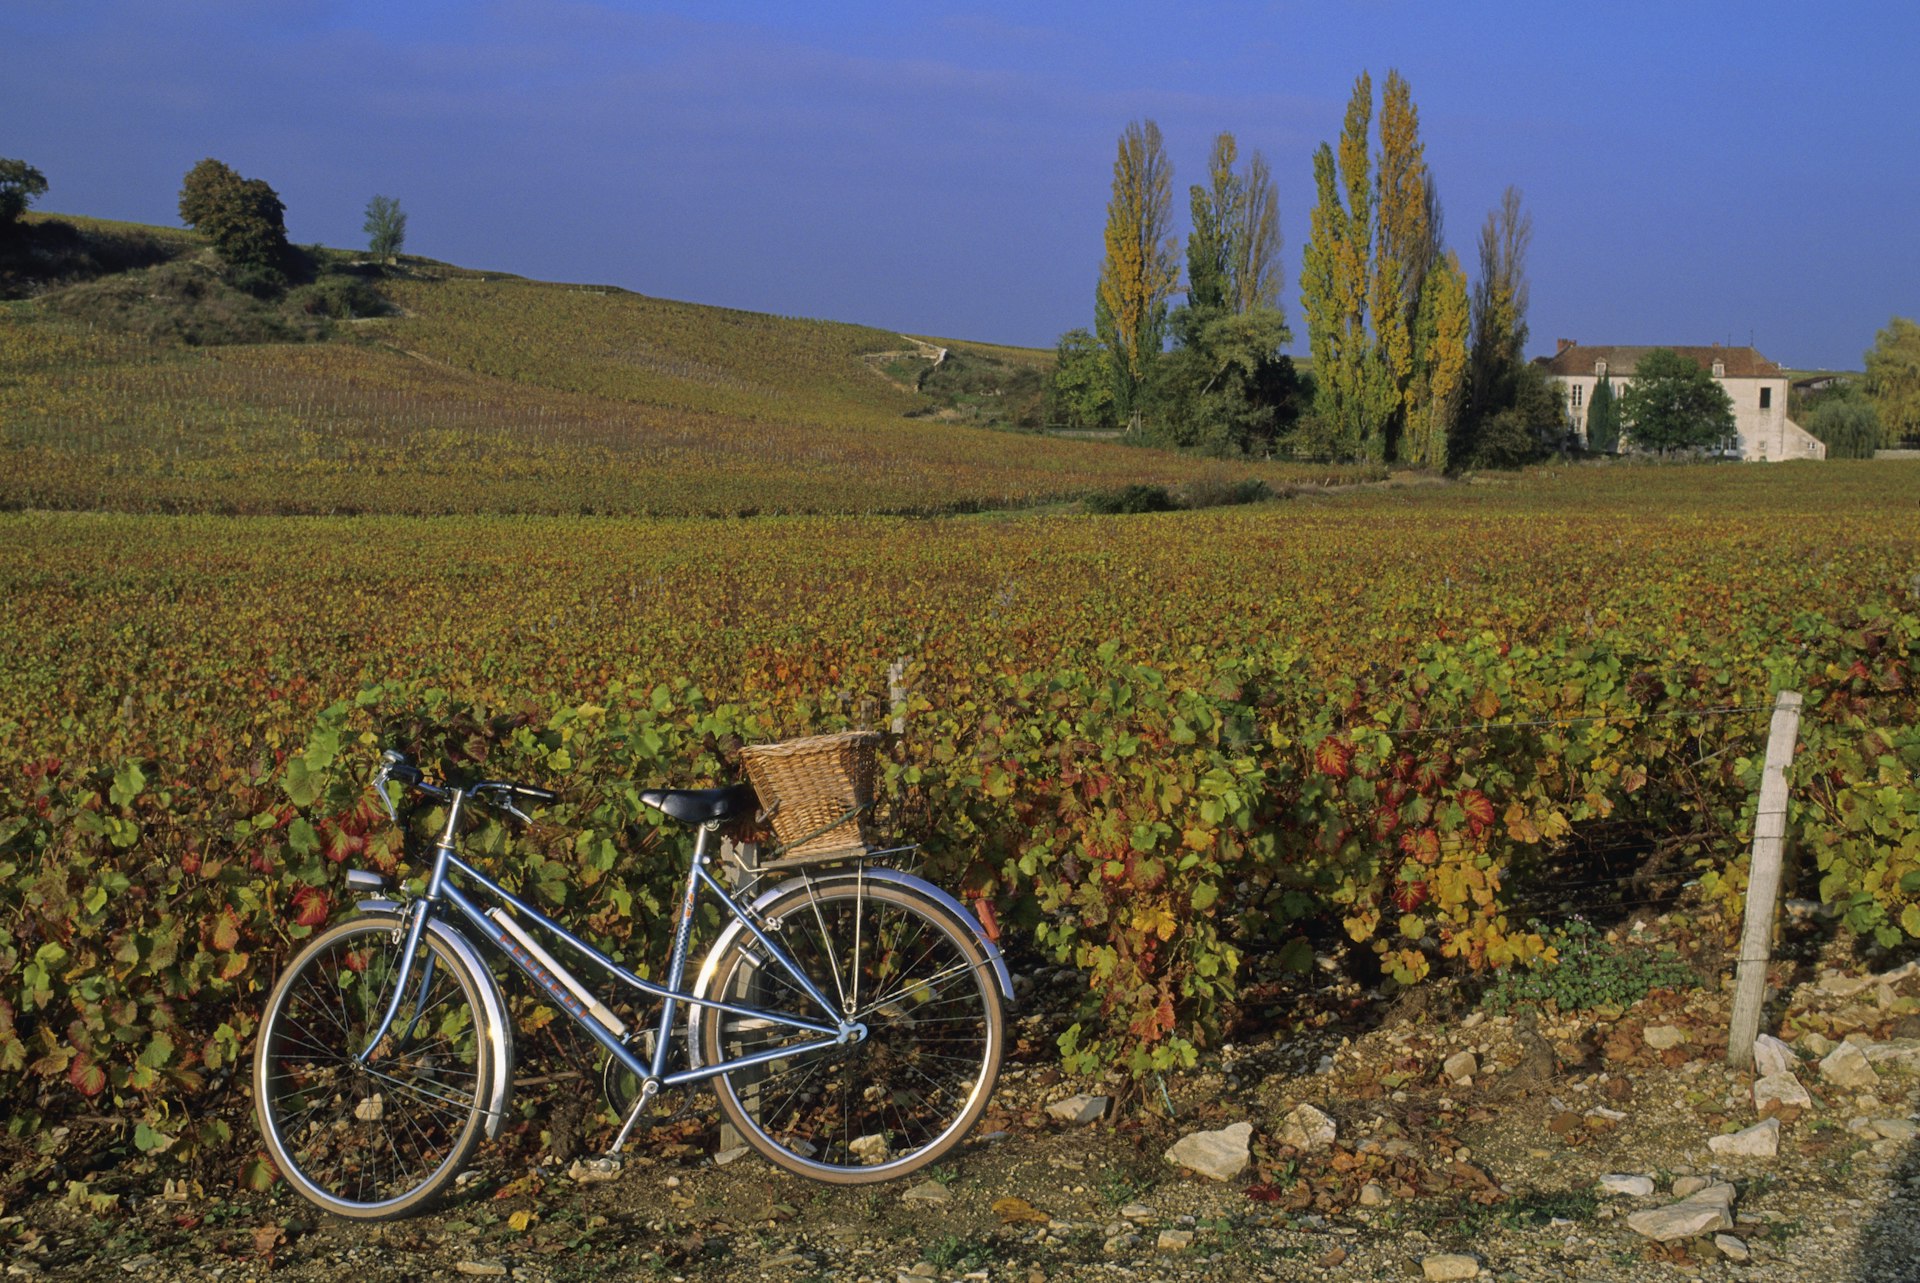 A bicycle with wicker basket rests against a vine-covered fence next to a vineyard in Burgundy, France